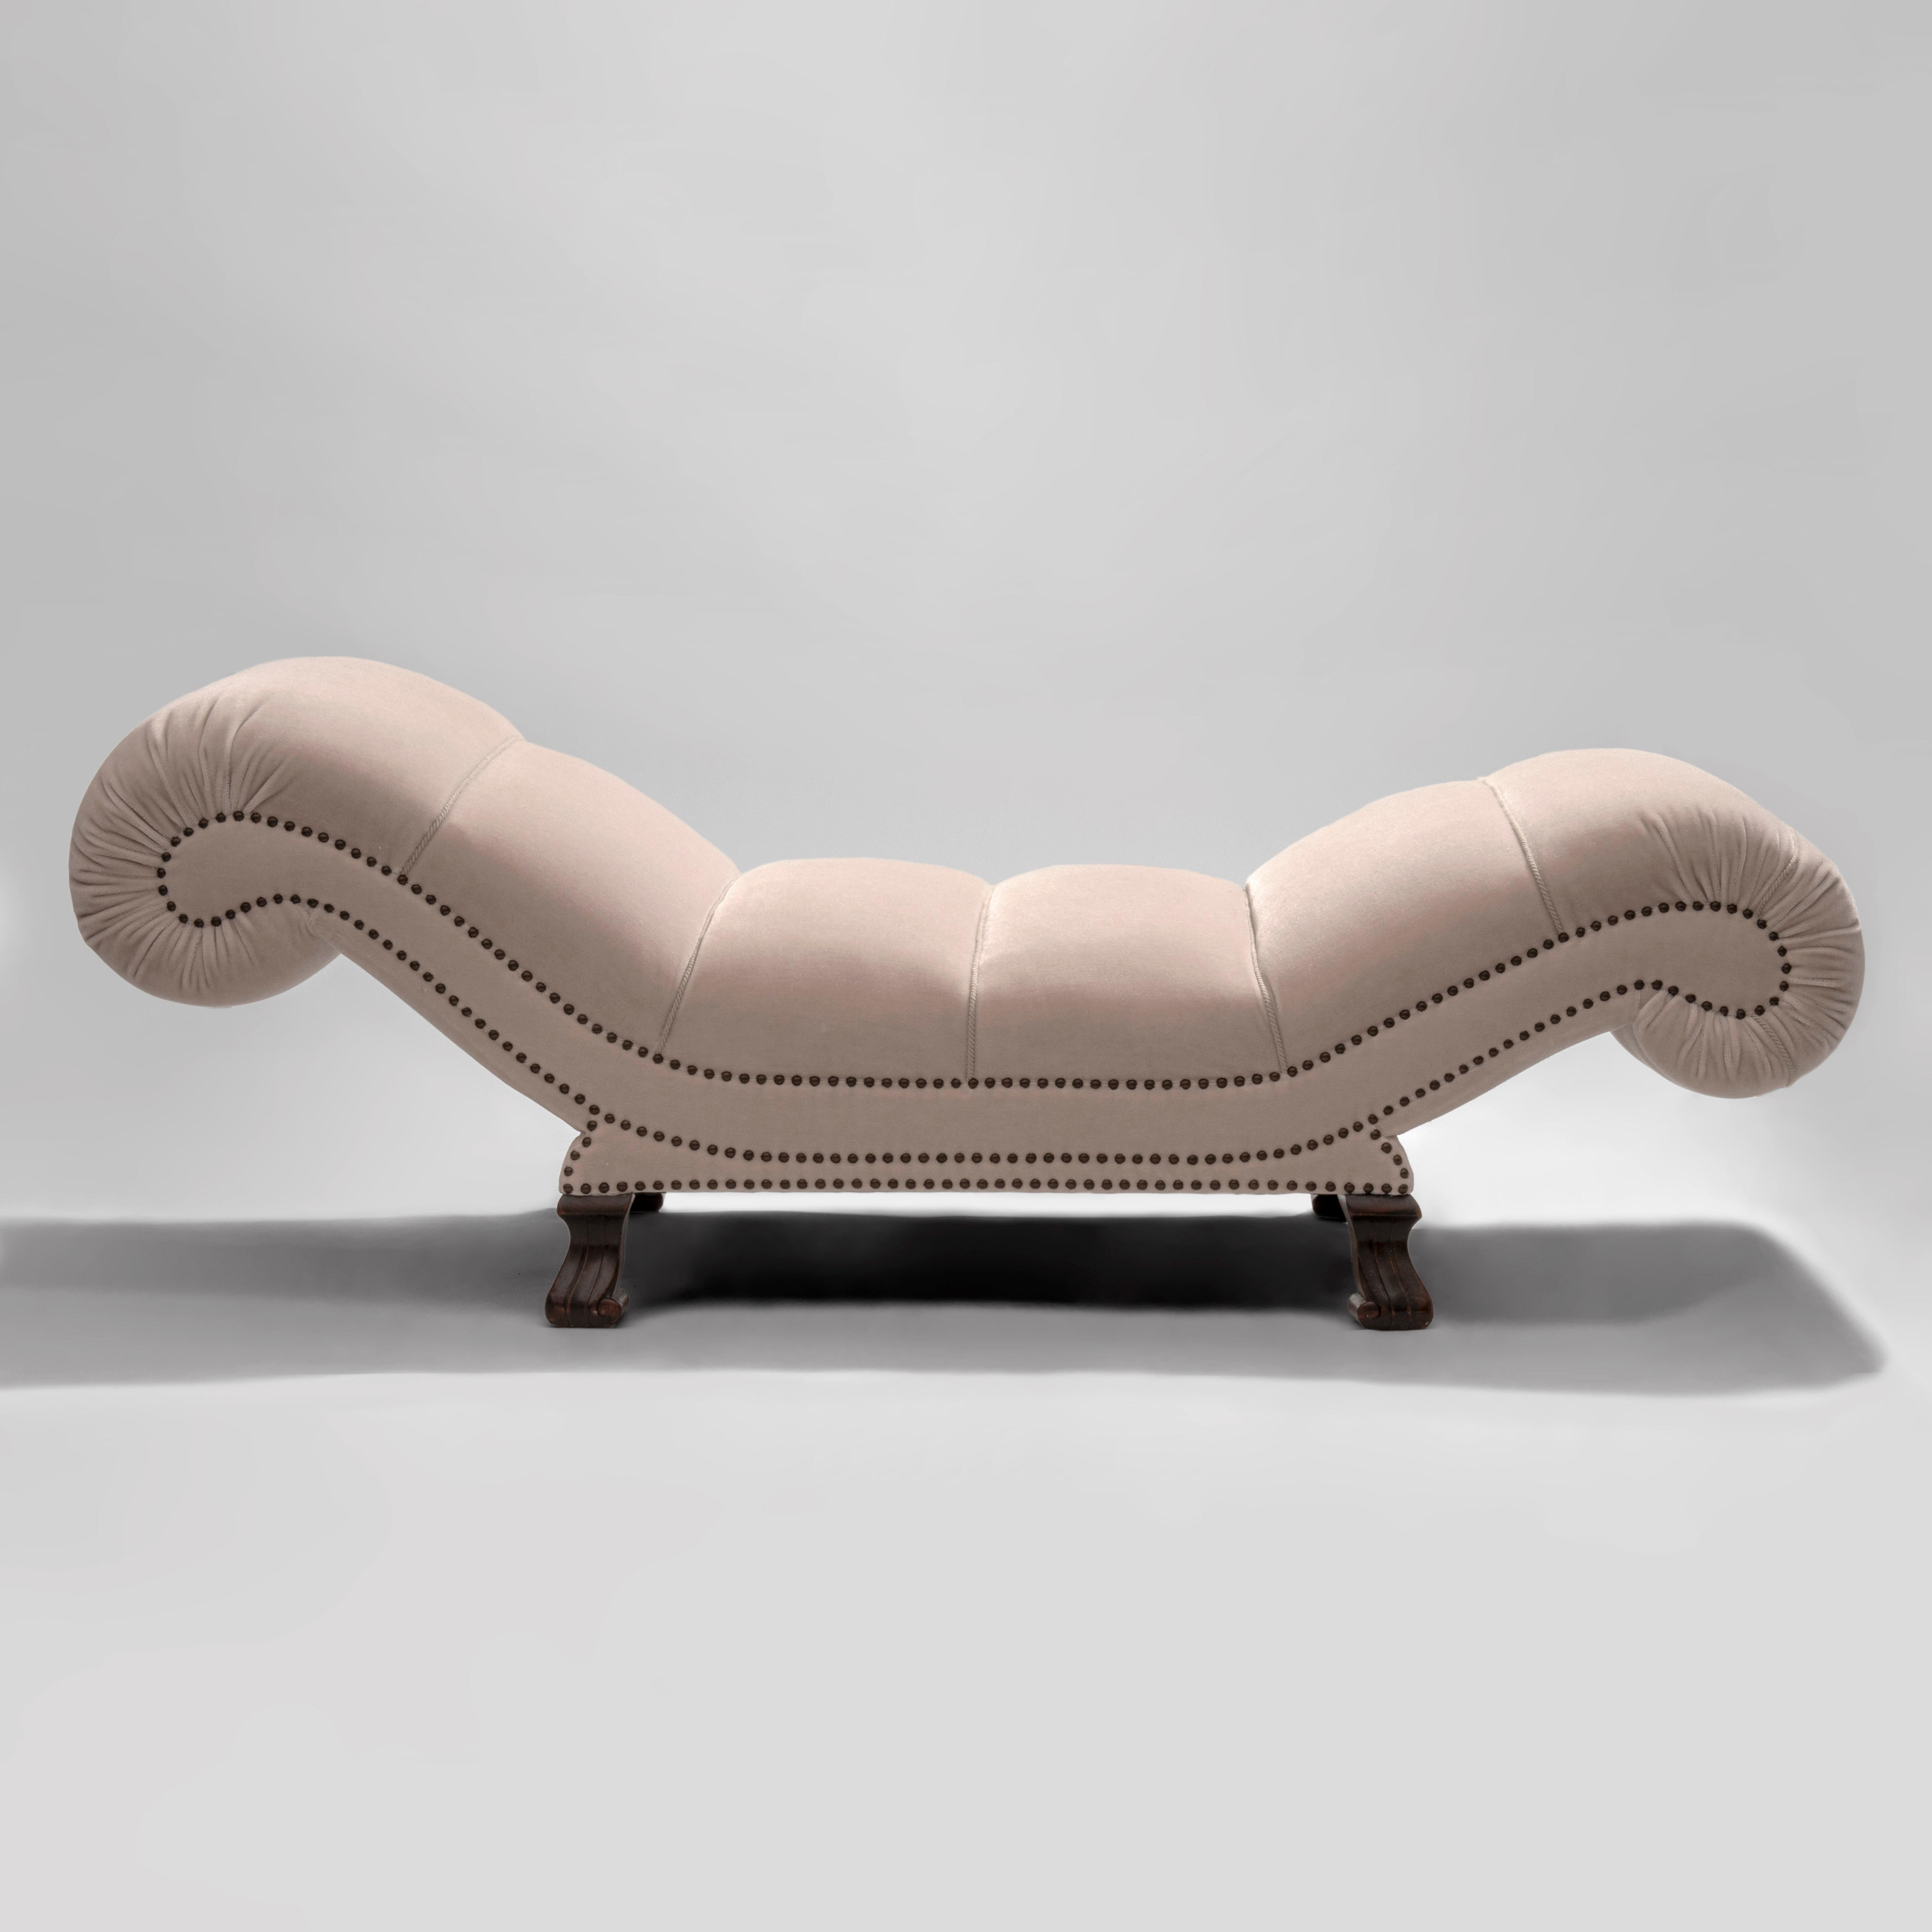 A large and supremely comfortable piece perfect for reading, relaxing and resting. Newly reupholstered in Maharam mohair. The perfectly contoured shape divided into gently rounded pads, each trimmed in cord, the ends scrolled under, the sides